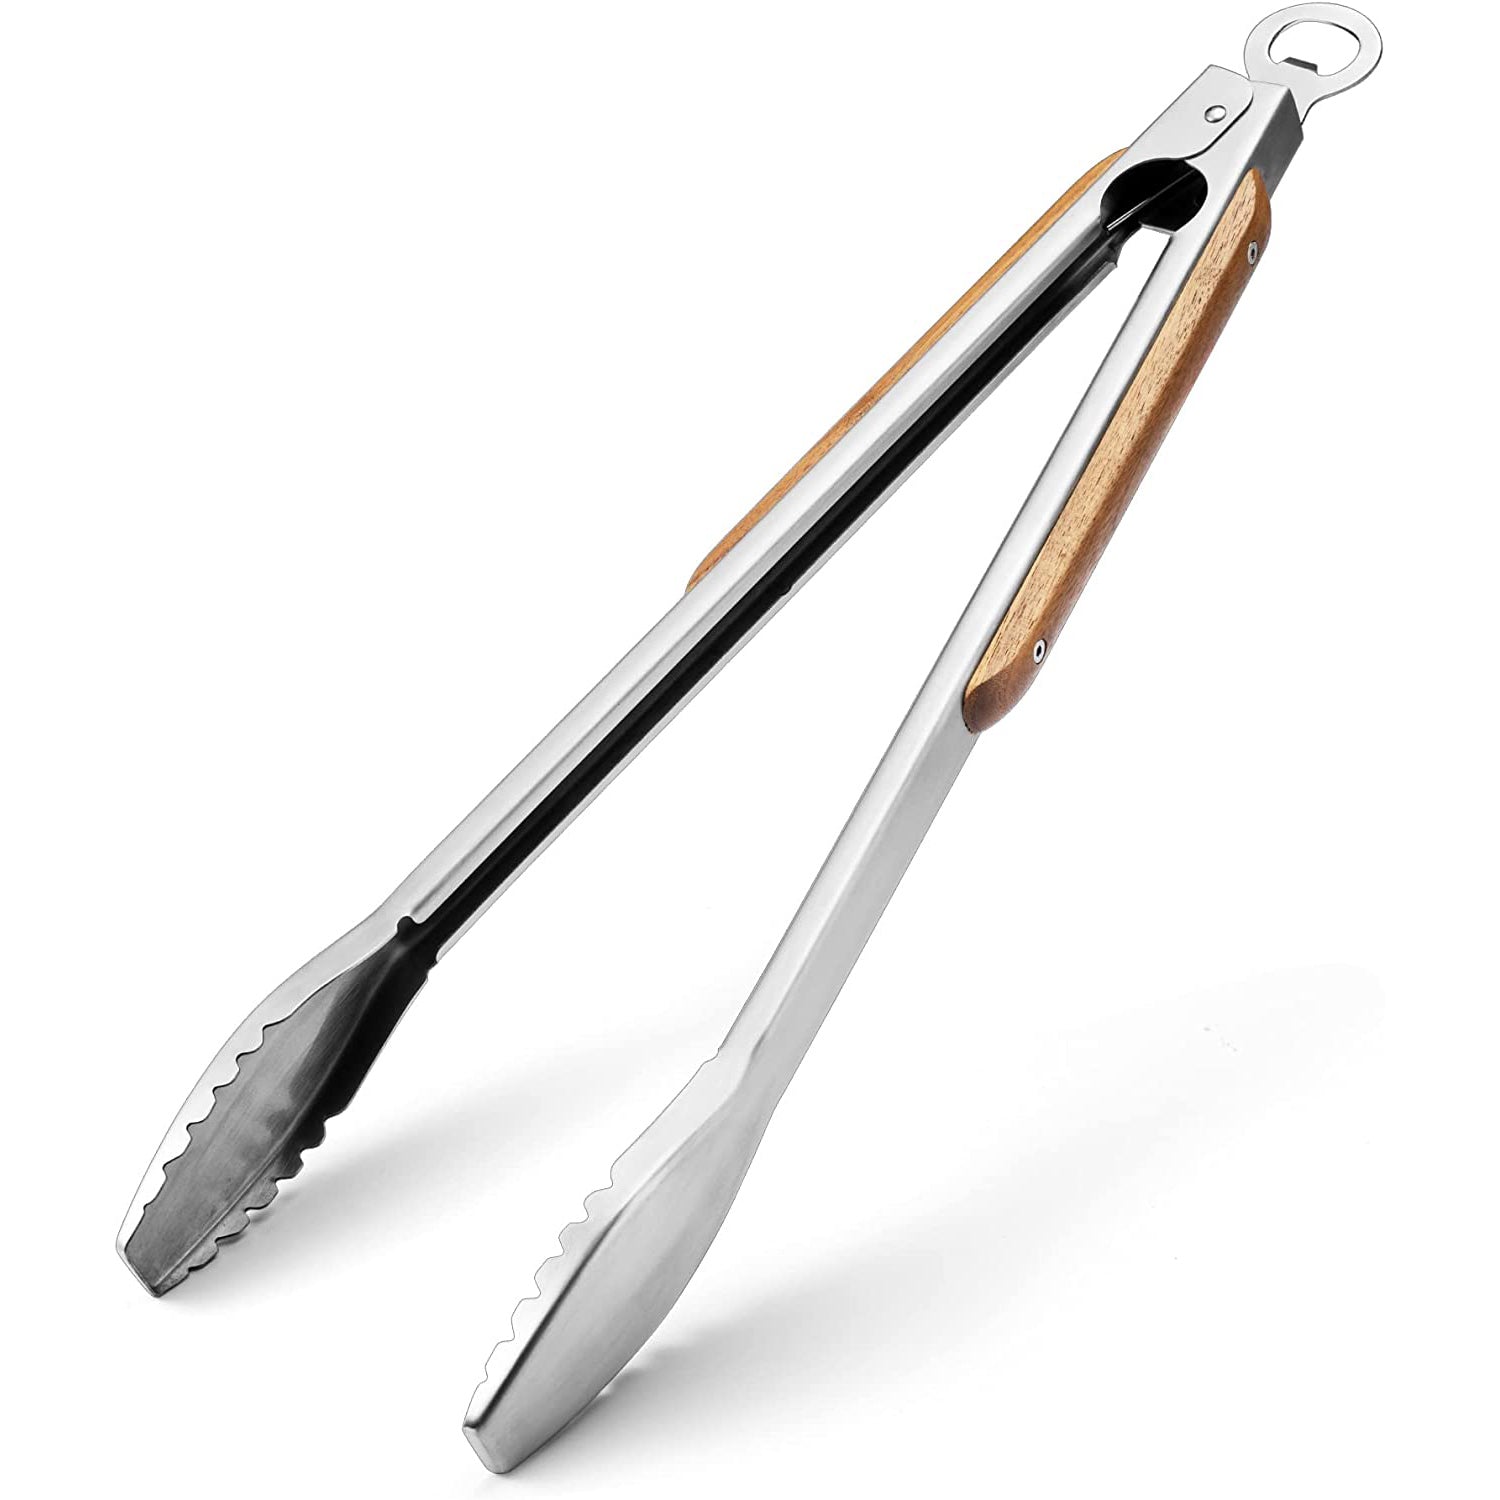 WOODHOT Stainless Steel BBQ Grill Tongs